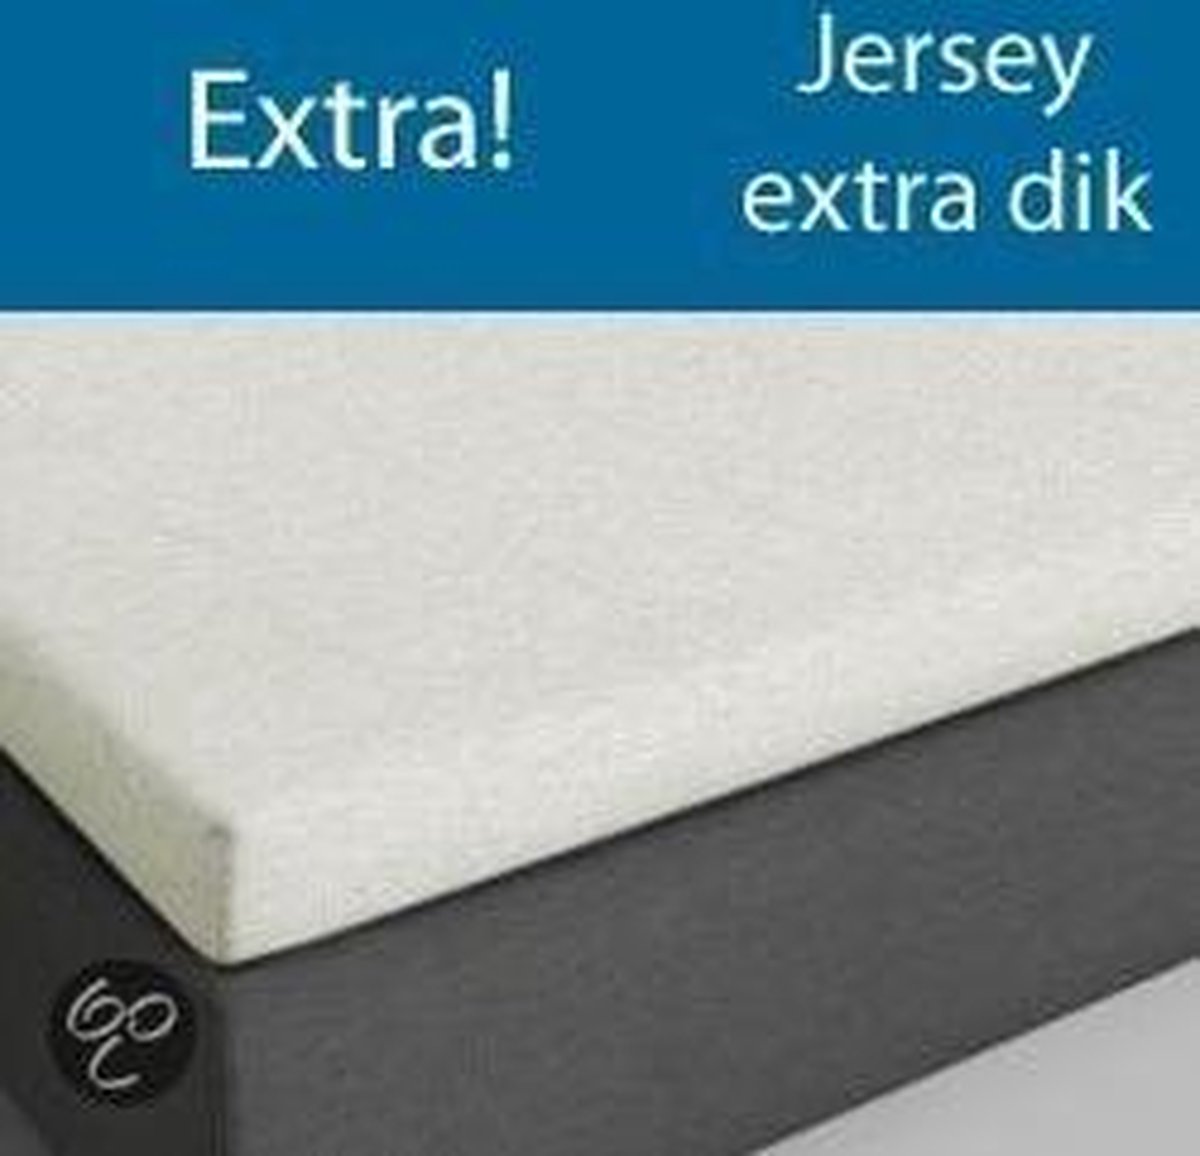 Topper hoeslaken Jersey extra - creme - (160x200/210 cm)